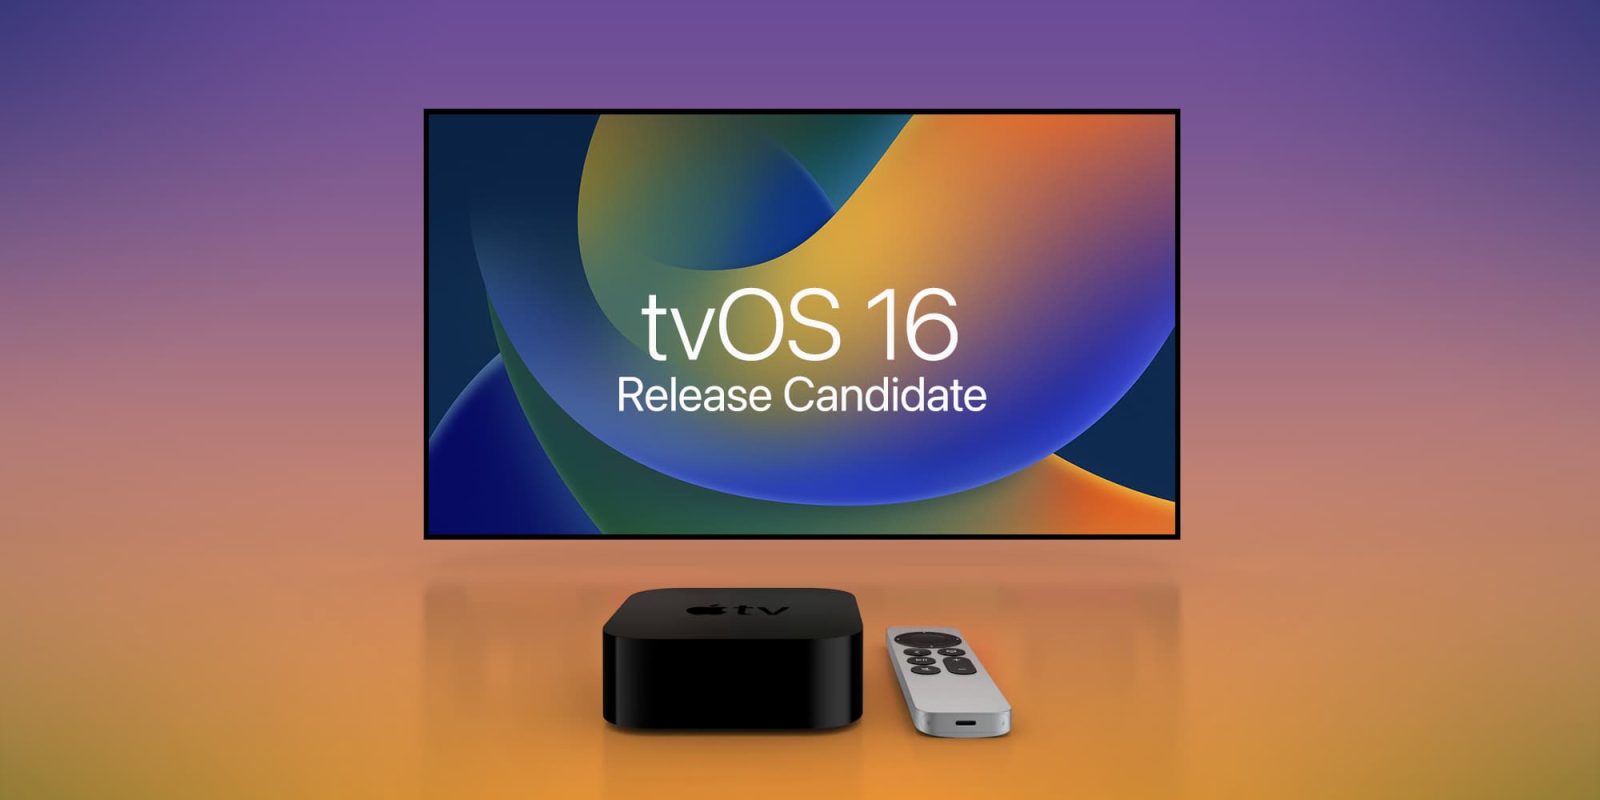 tvOS 16 Release Candidate